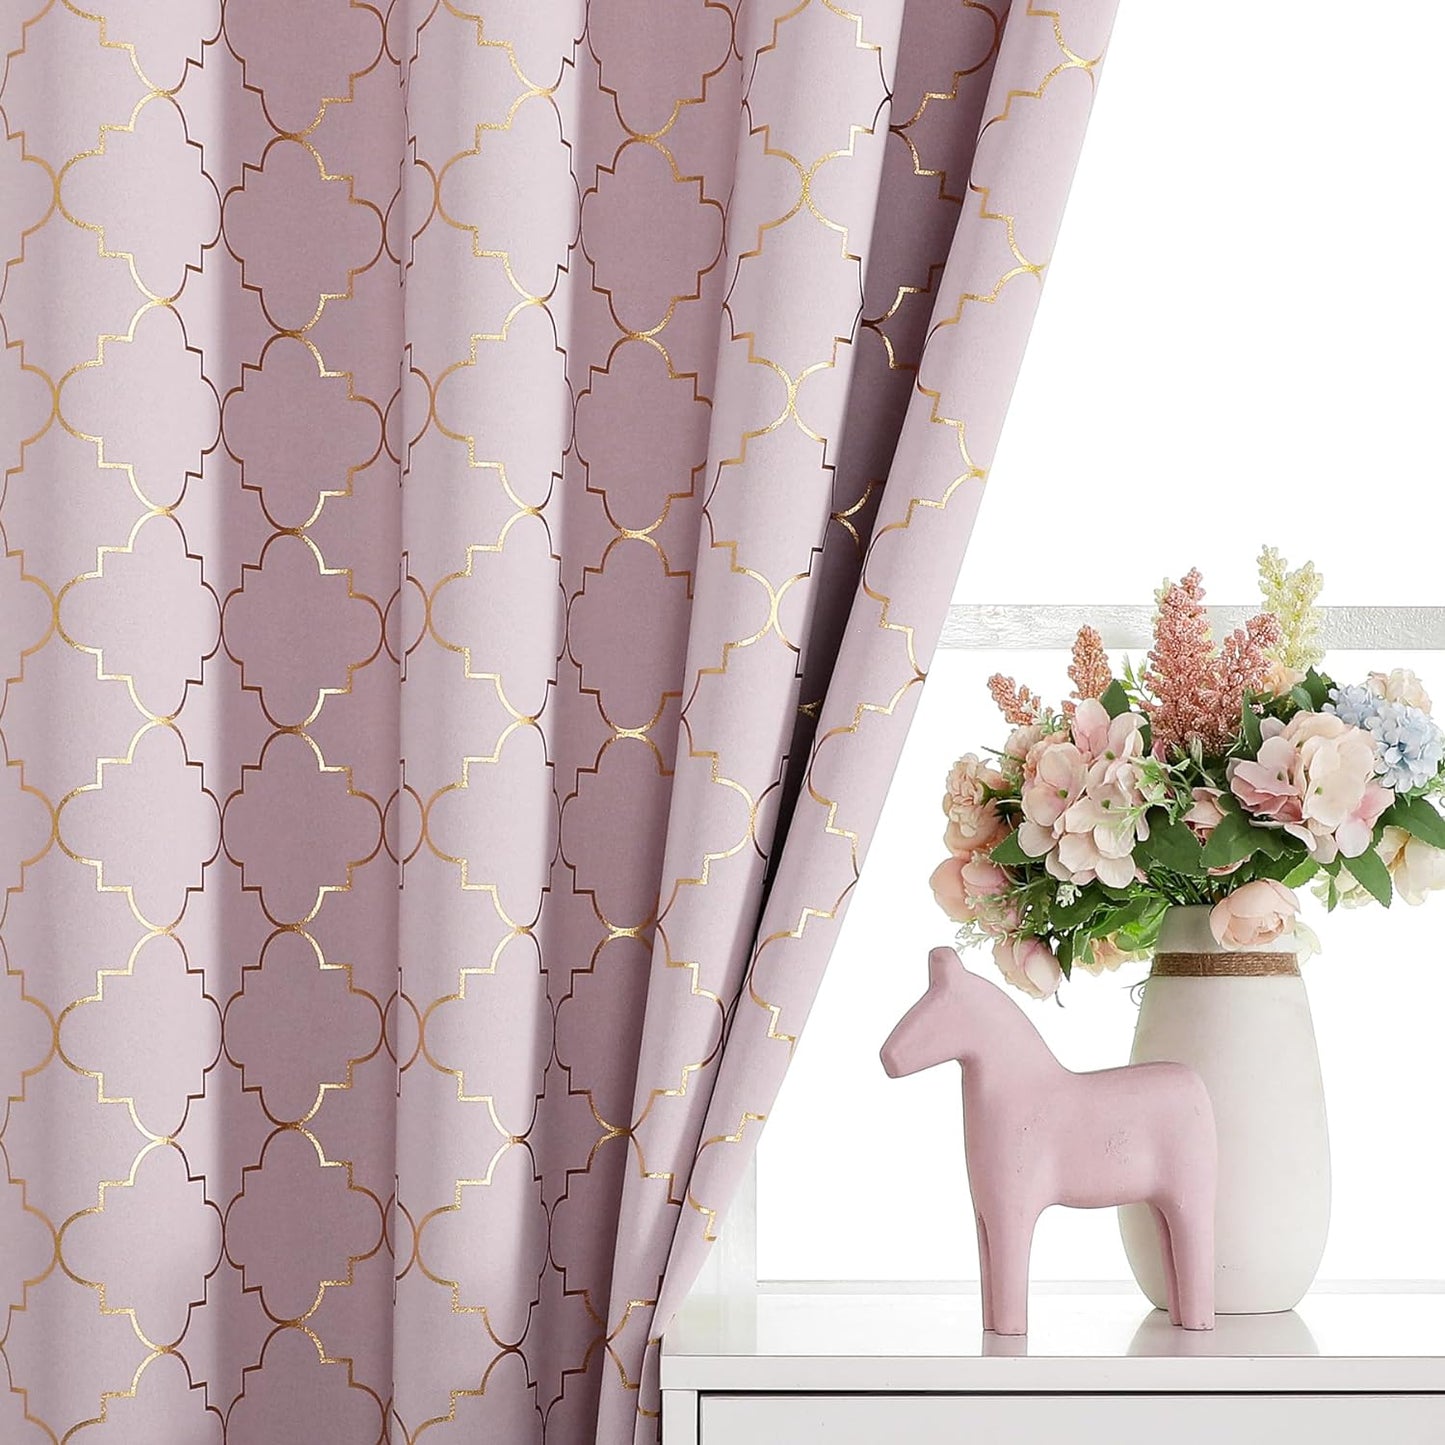 Enactex 100% Full Blackout Curtains 63 Inch Length Thermal Insulated Grey Curtain with Gold Geometric Metallic Pattern, Light Blocking Grommet Window Drapes for Living Room Bedroom, 2 Panels  Enactex Pink/Gold W52" X L84" X2 